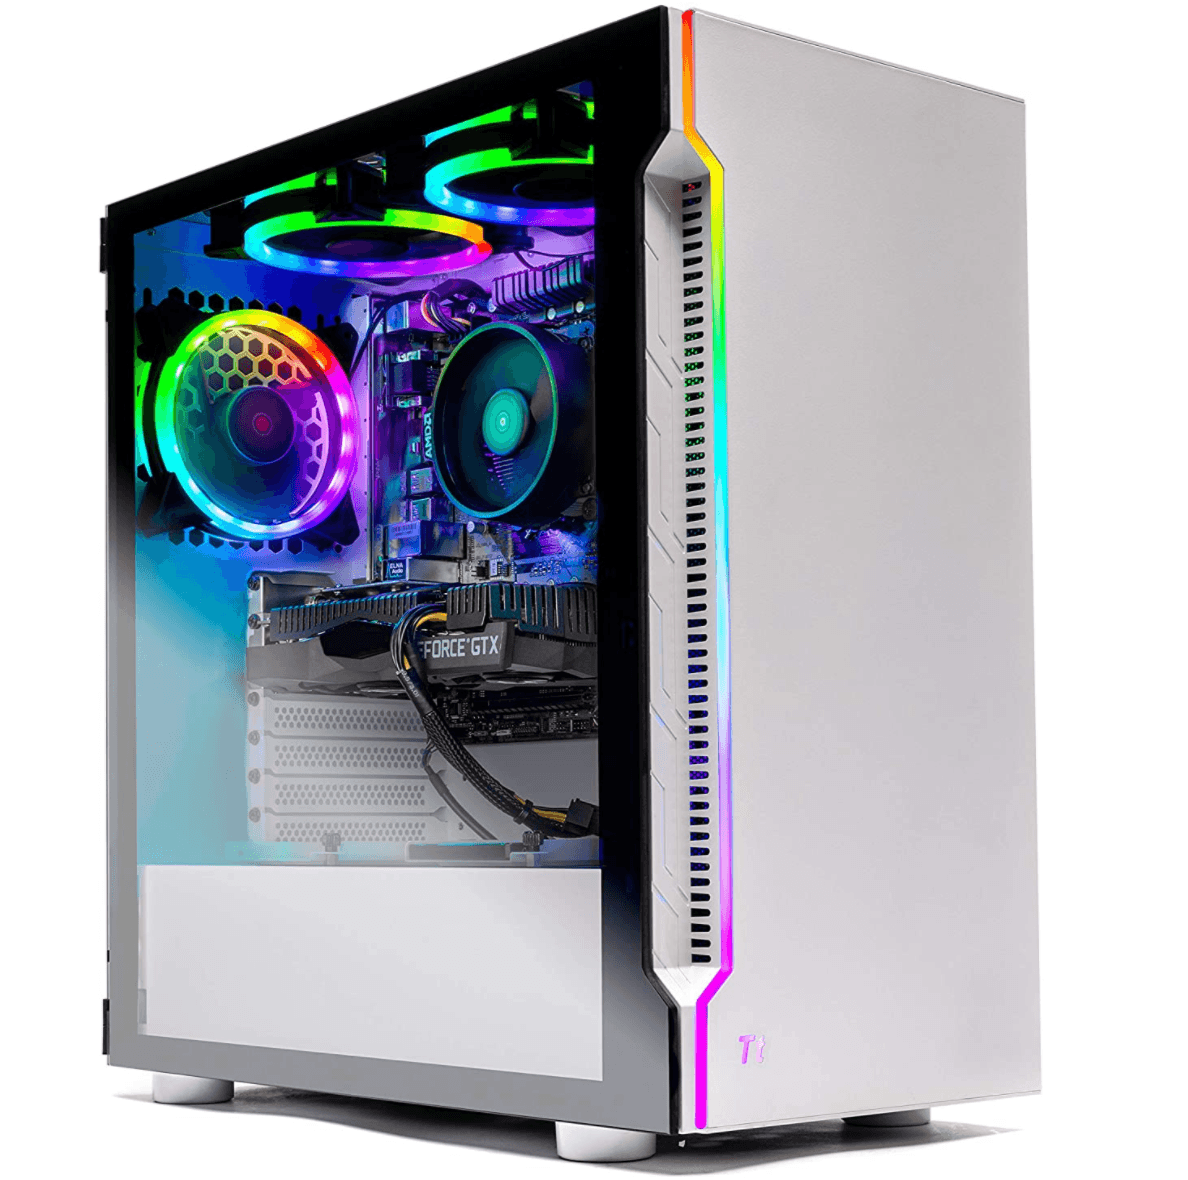 The Best Gaming PC Build For 1000 in 2020 1440p at 60fps! PC Game